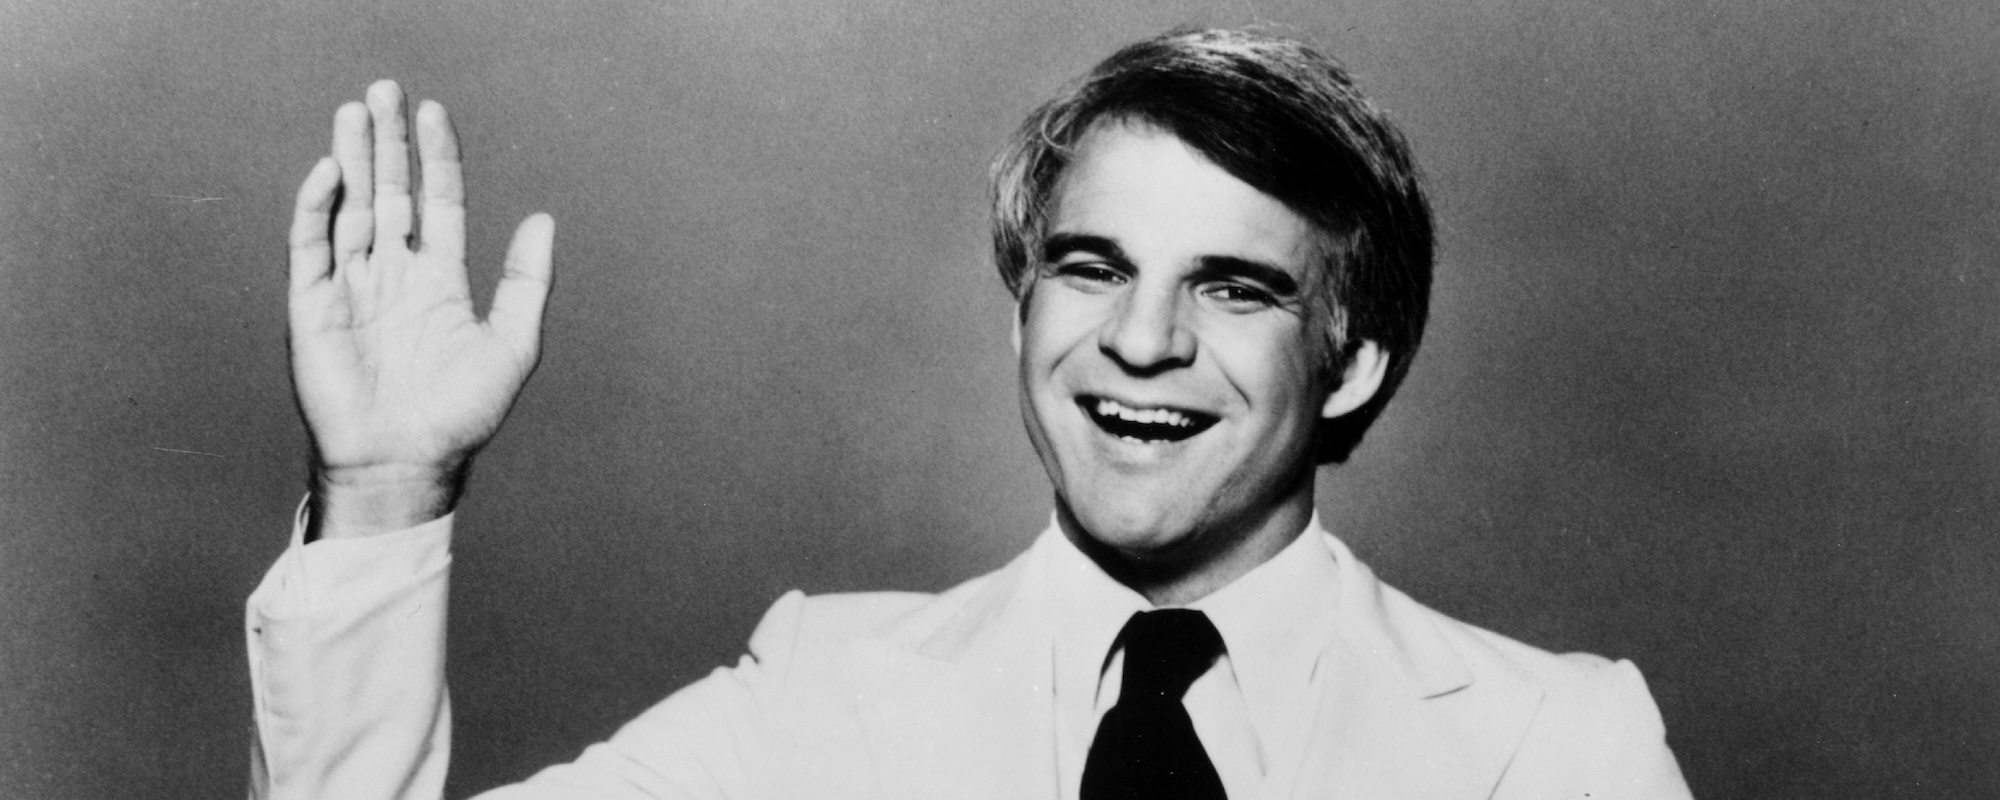 4 Songs You Didn’t Know Steve Martin Wrote